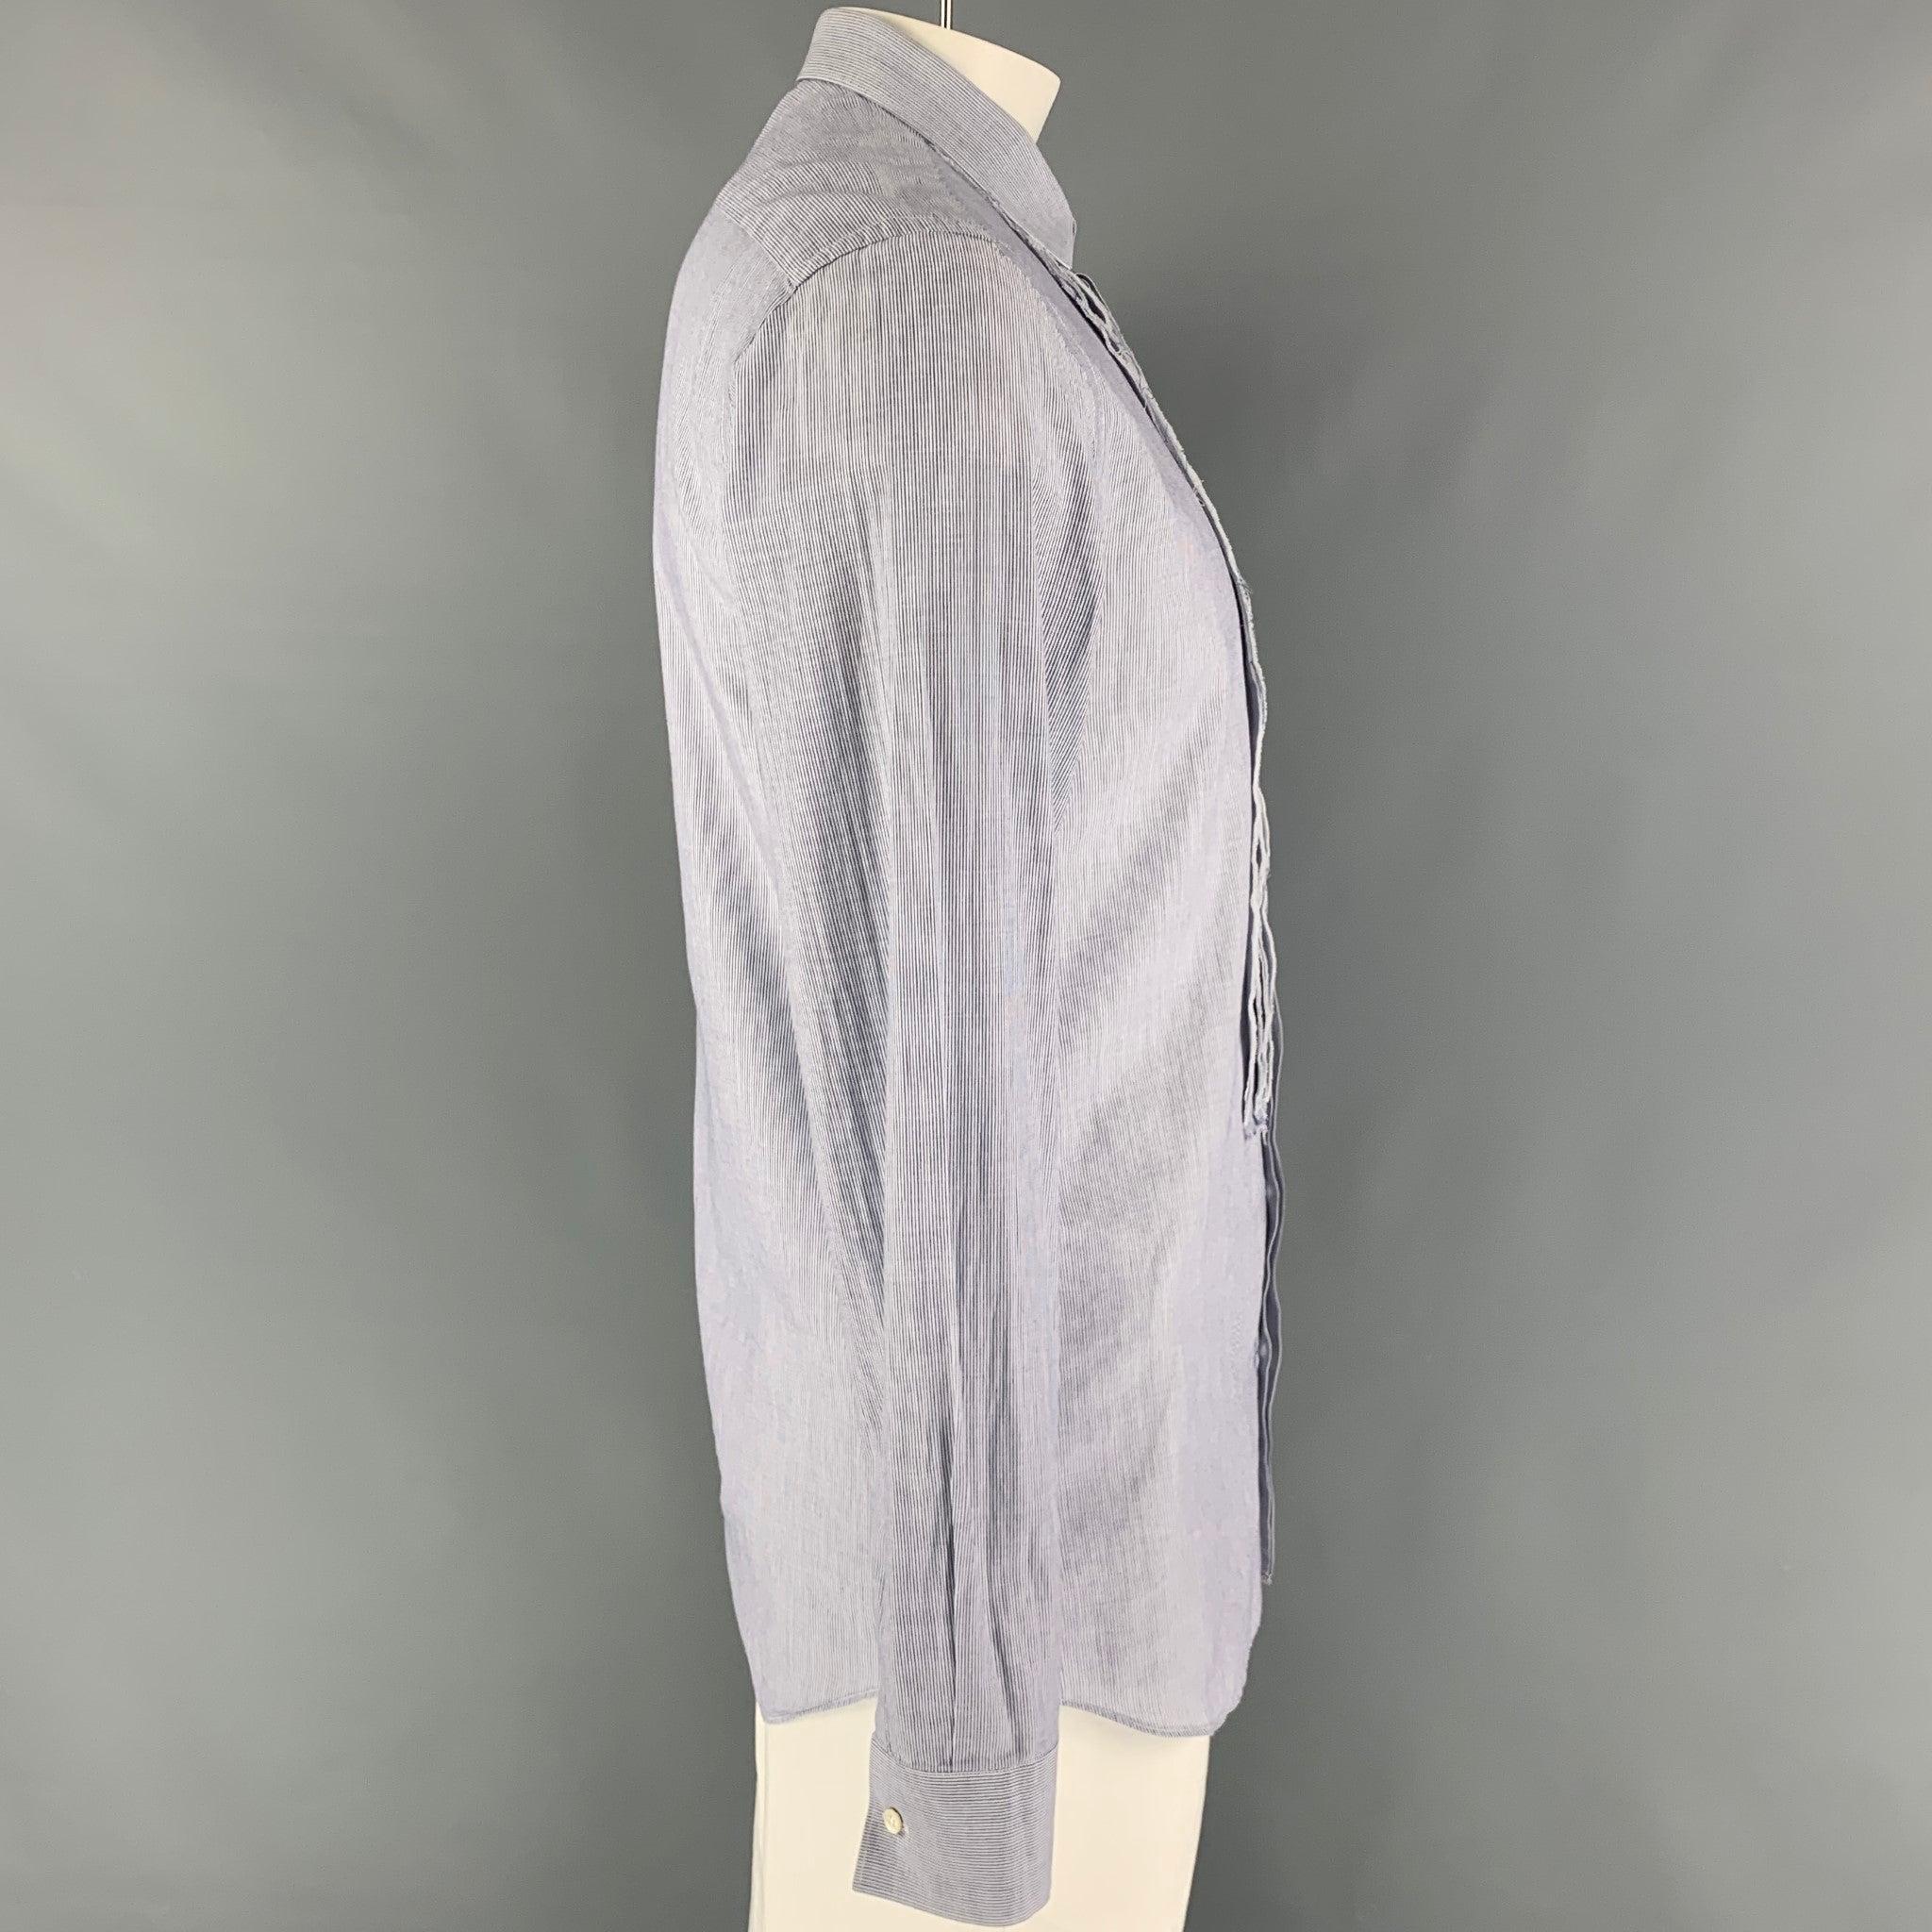 NEIL BARRETT long sleeve shirt comes in a blue stripe cotton featuring a slim fit, raw edge, spread collar, and a hidden placket closure. Made in Italy.
Very Good
Pre-Owned Condition. 

Marked:   16.5/42 

Measurements: 
 
Shoulder: 19 inches 